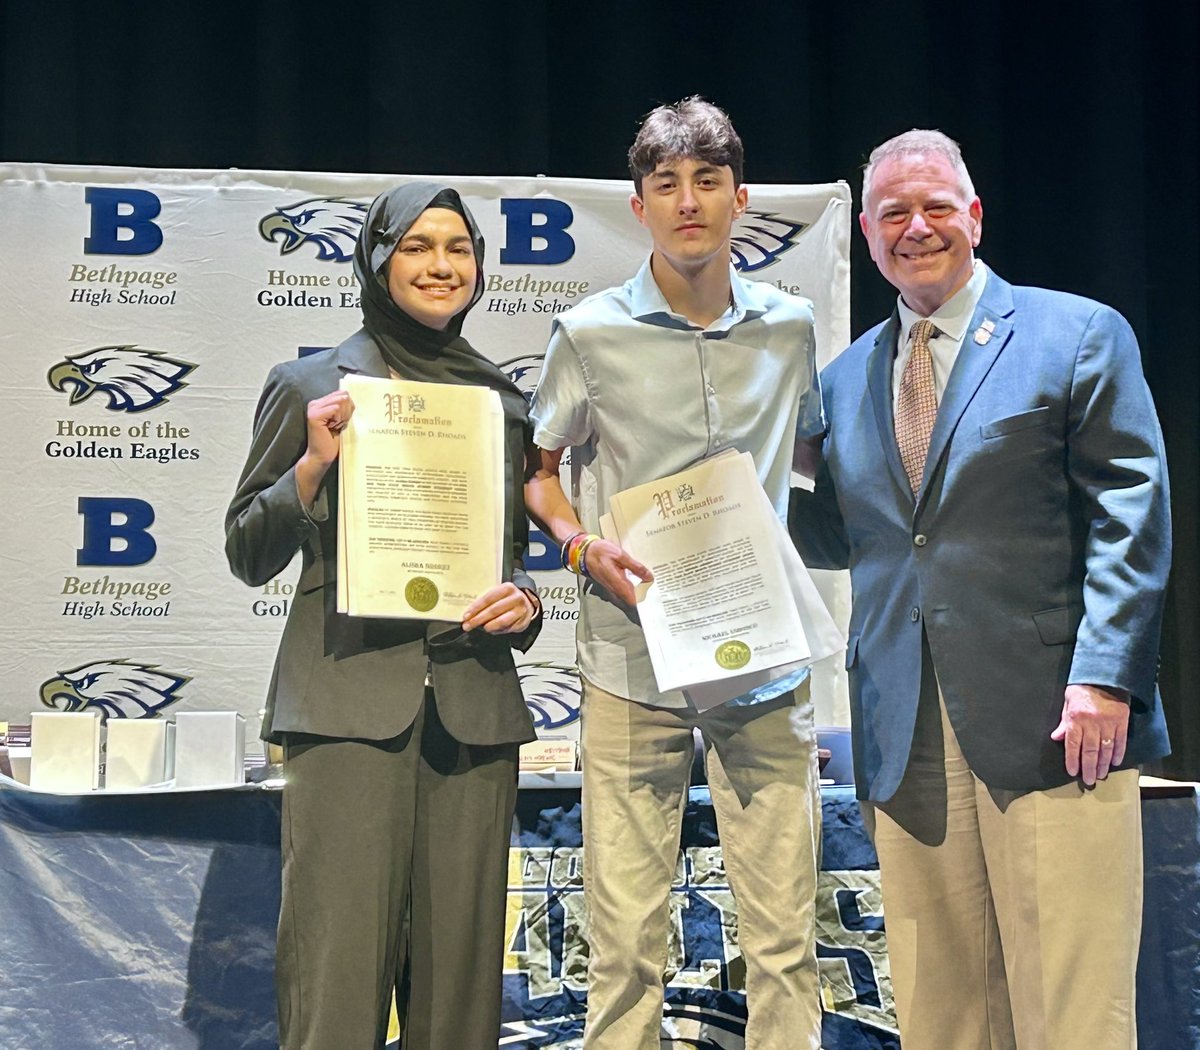 Honored to present the New York State Senate Citizenship Award to Bethpage High School Seniors Alisha Siddiqui and Michael LoBosco at last nights Senior Awards. Congratulations and best of luck in all your future endeavors! 

#bethpage #bethpageny #senior #longislandny